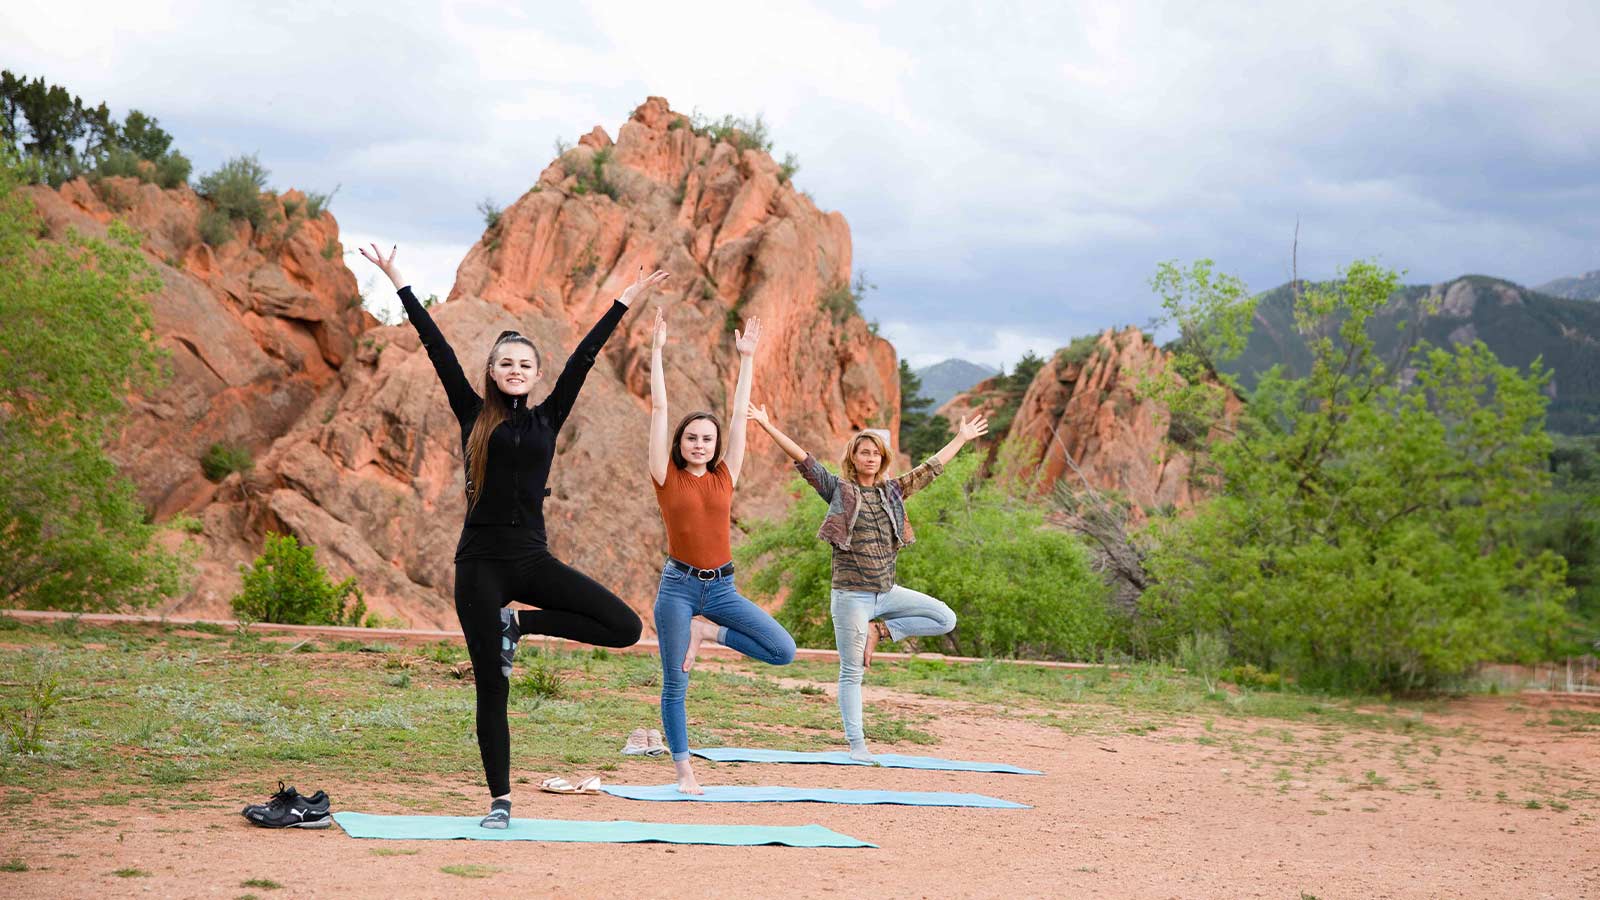 Three individuals performing yoga poses on mats in an outdoor setting with red rocks and greenery in the background.